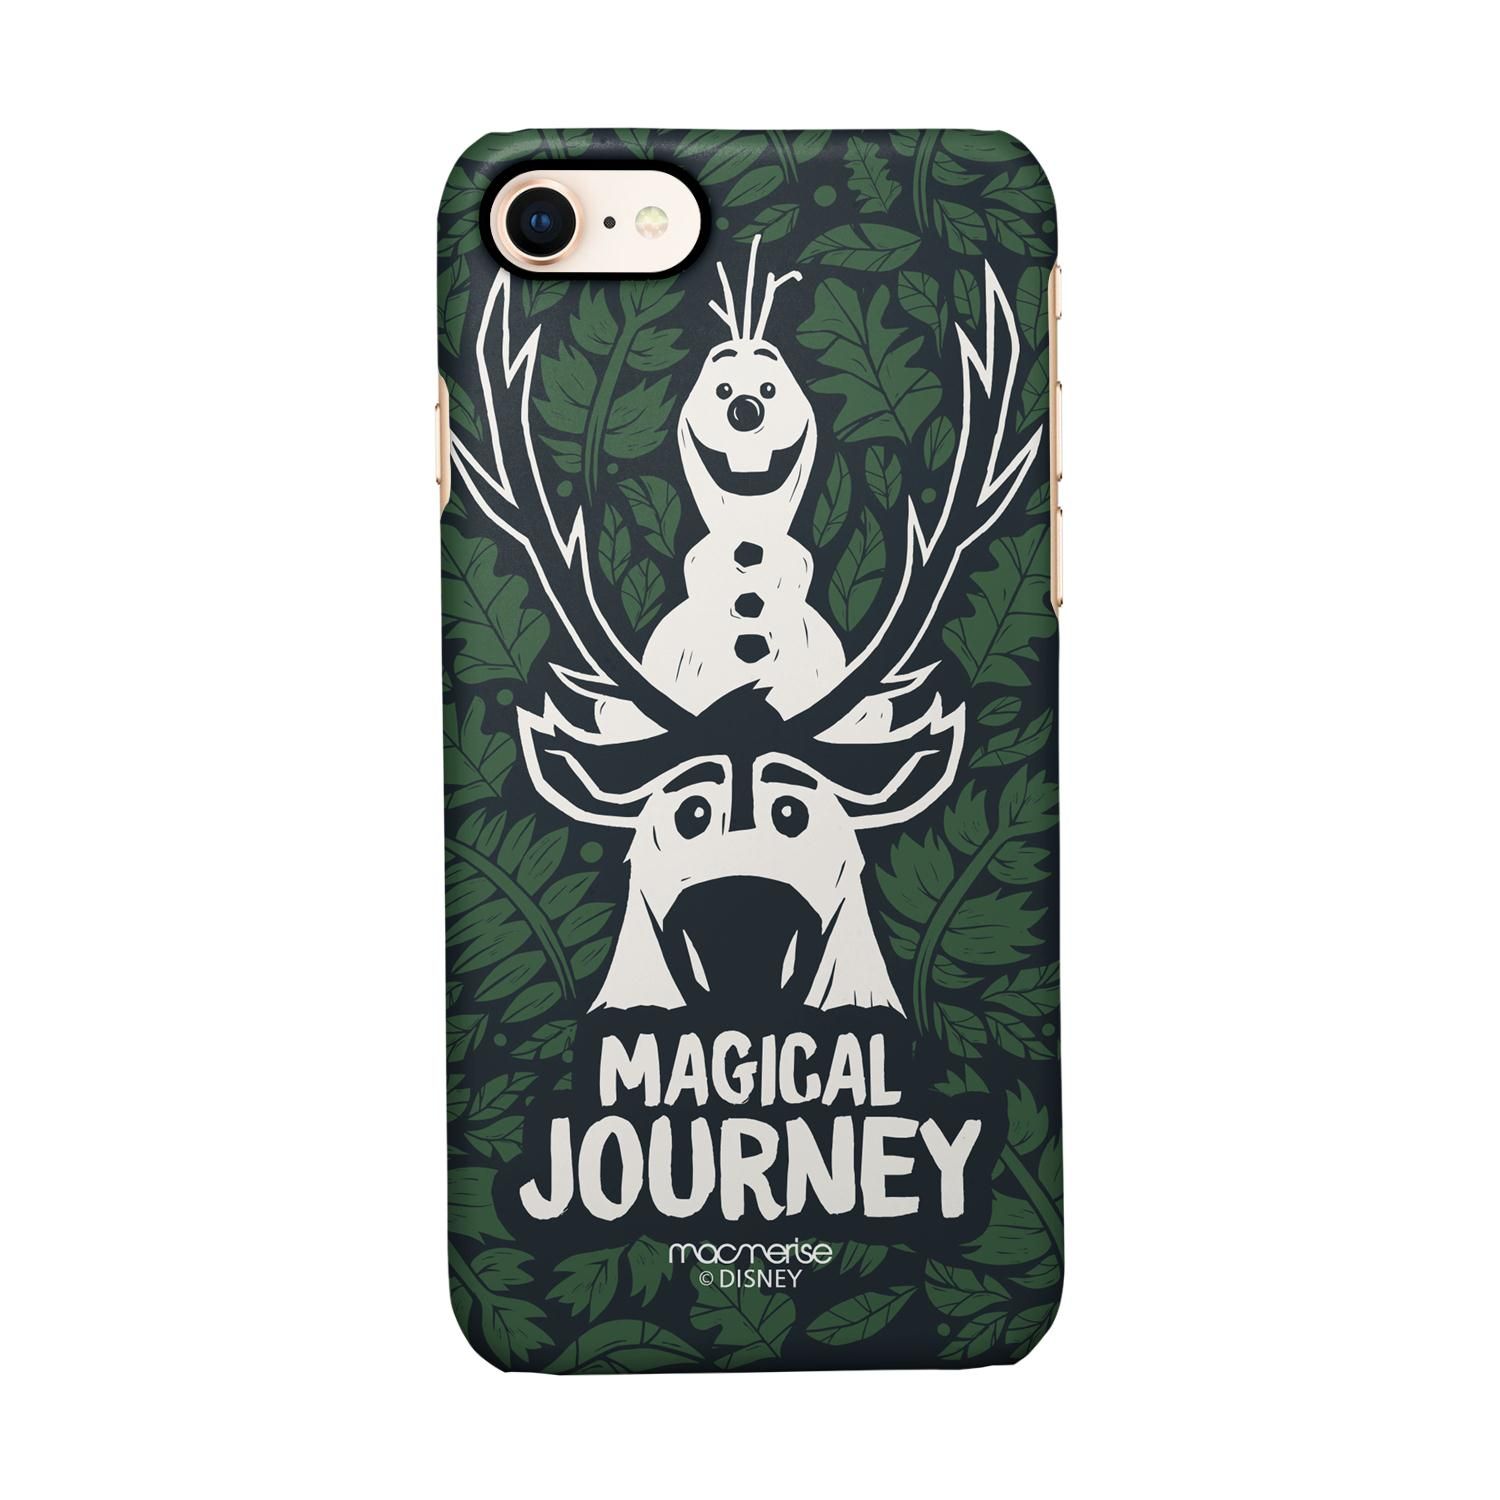 Buy Magical Journey - Sleek Phone Case for iPhone 7 Online